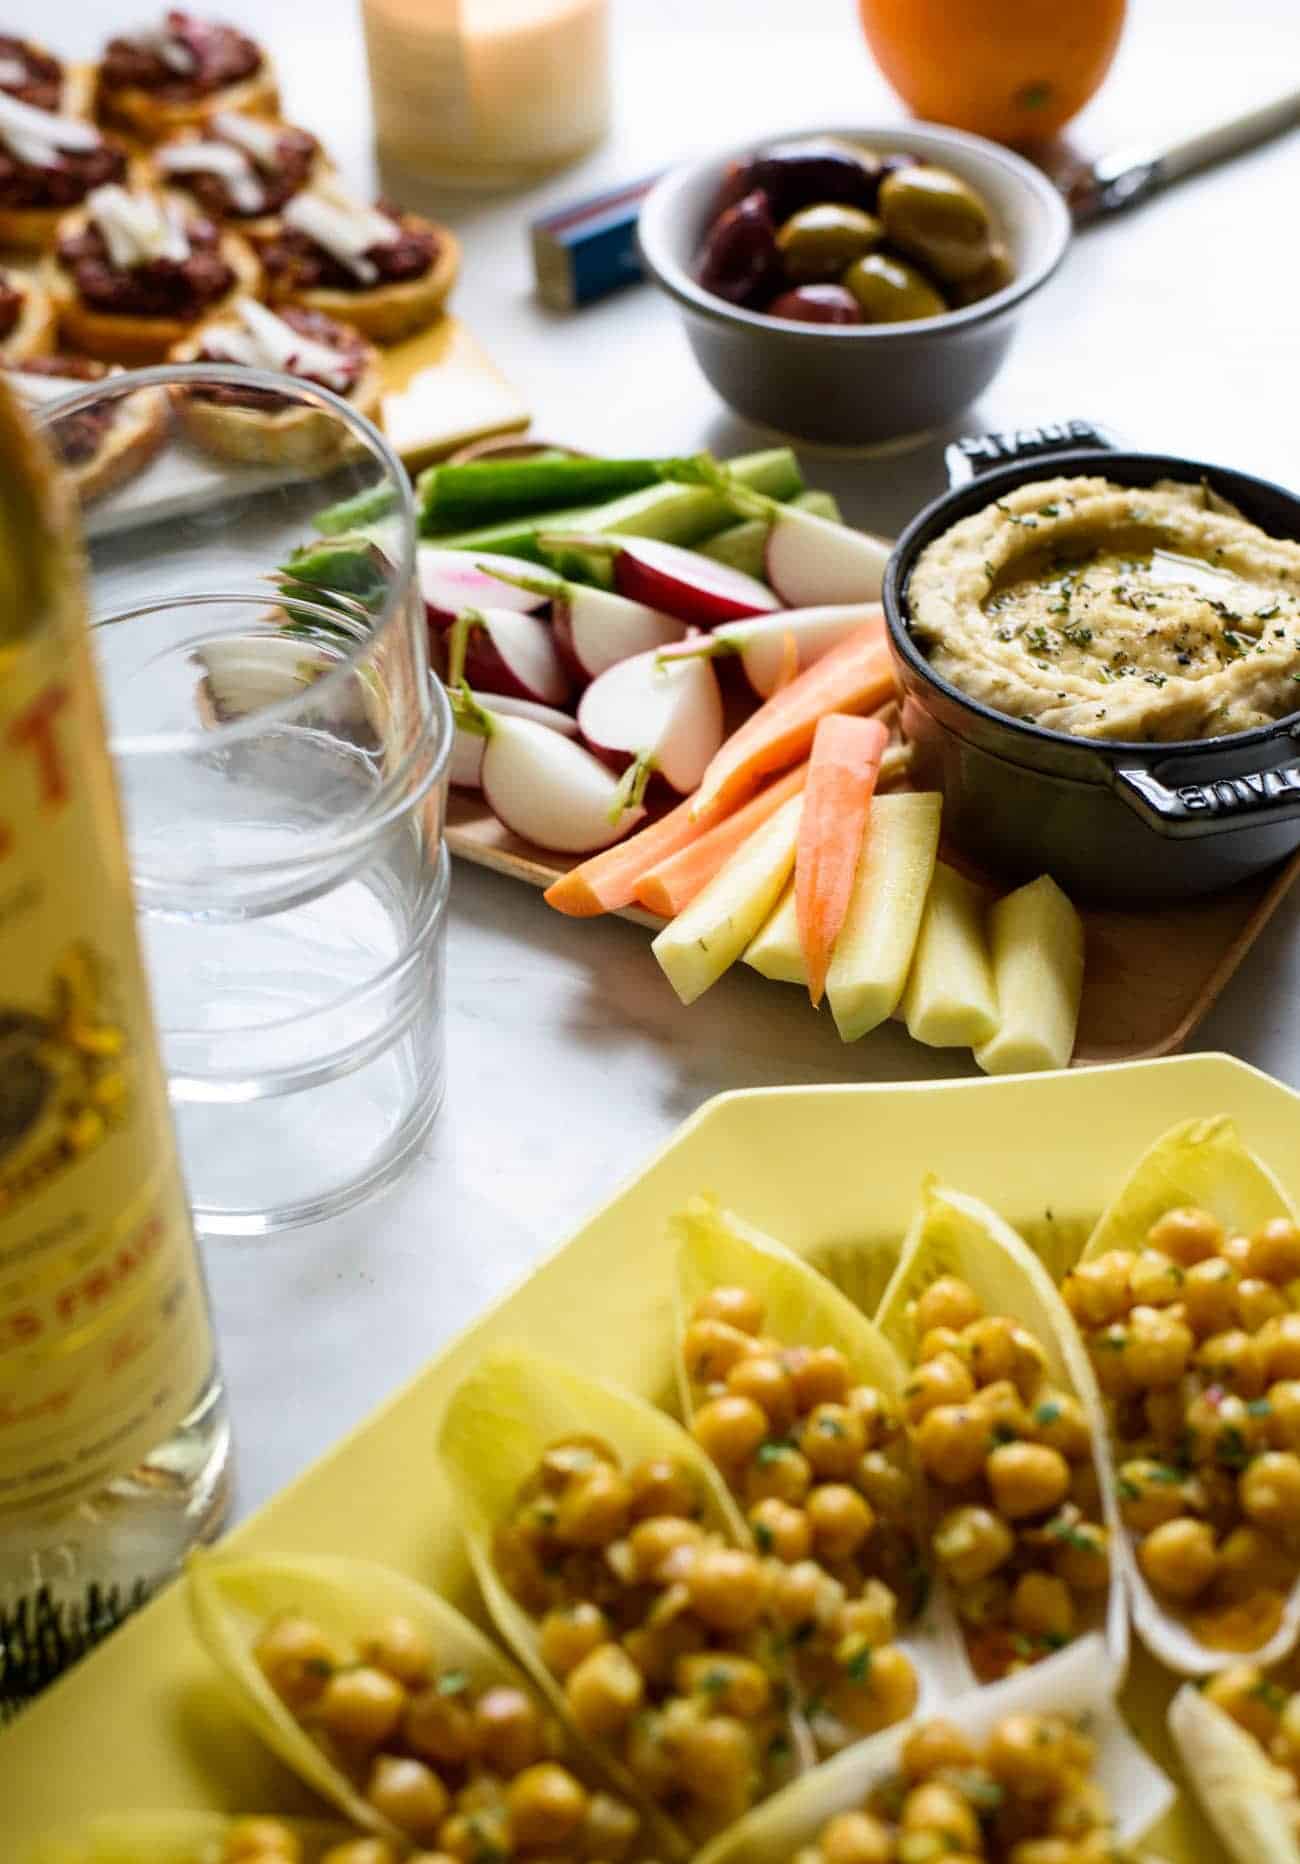 Cocktail party snacks on a marble table: white bean dip with crudites and curried chickpea salad in endive spears